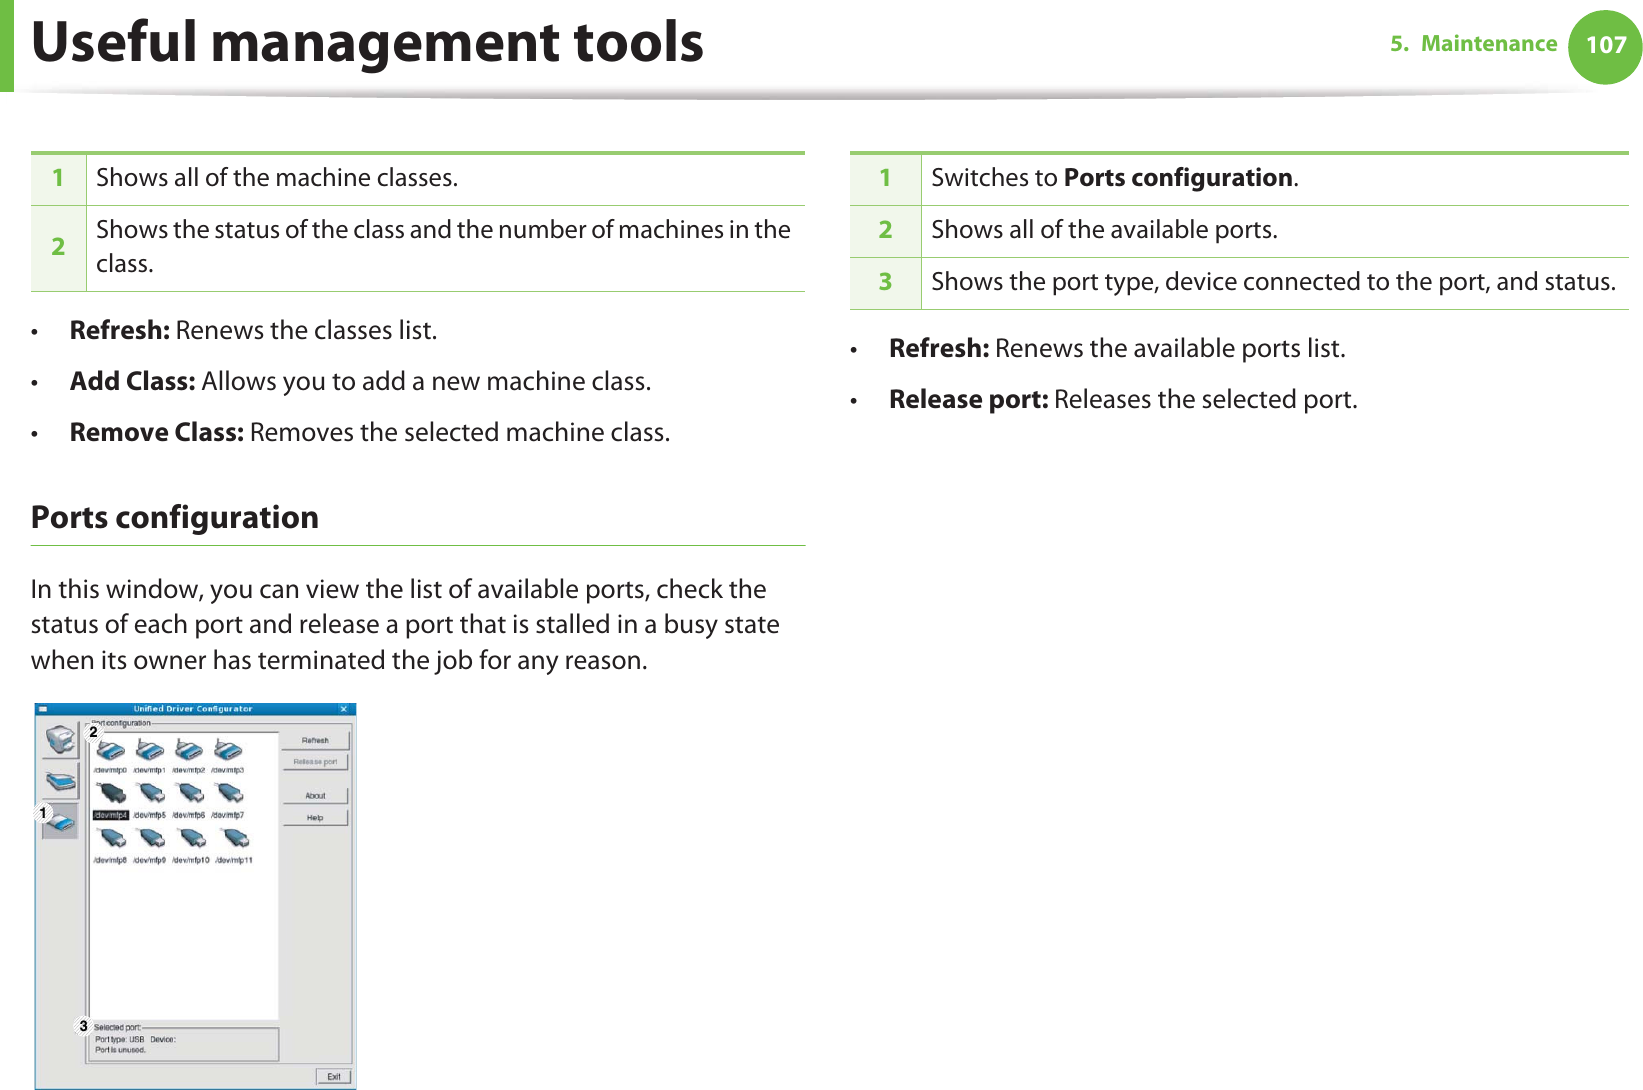 Useful management tools 1075. Maintenance•Refresh: Renews the classes list.•Add Class: Allows you to add a new machine class.•Remove Class: Removes the selected machine class.Ports configurationIn this window, you can view the list of available ports, check the status of each port and release a port that is stalled in a busy state when its owner has terminated the job for any reason.•Refresh: Renews the available ports list.•Release port: Releases the selected port.1Shows all of the machine classes.2Shows the status of the class and the number of machines in the class.1 231Switches to Ports configuration.2Shows all of the available ports.3Shows the port type, device connected to the port, and status.